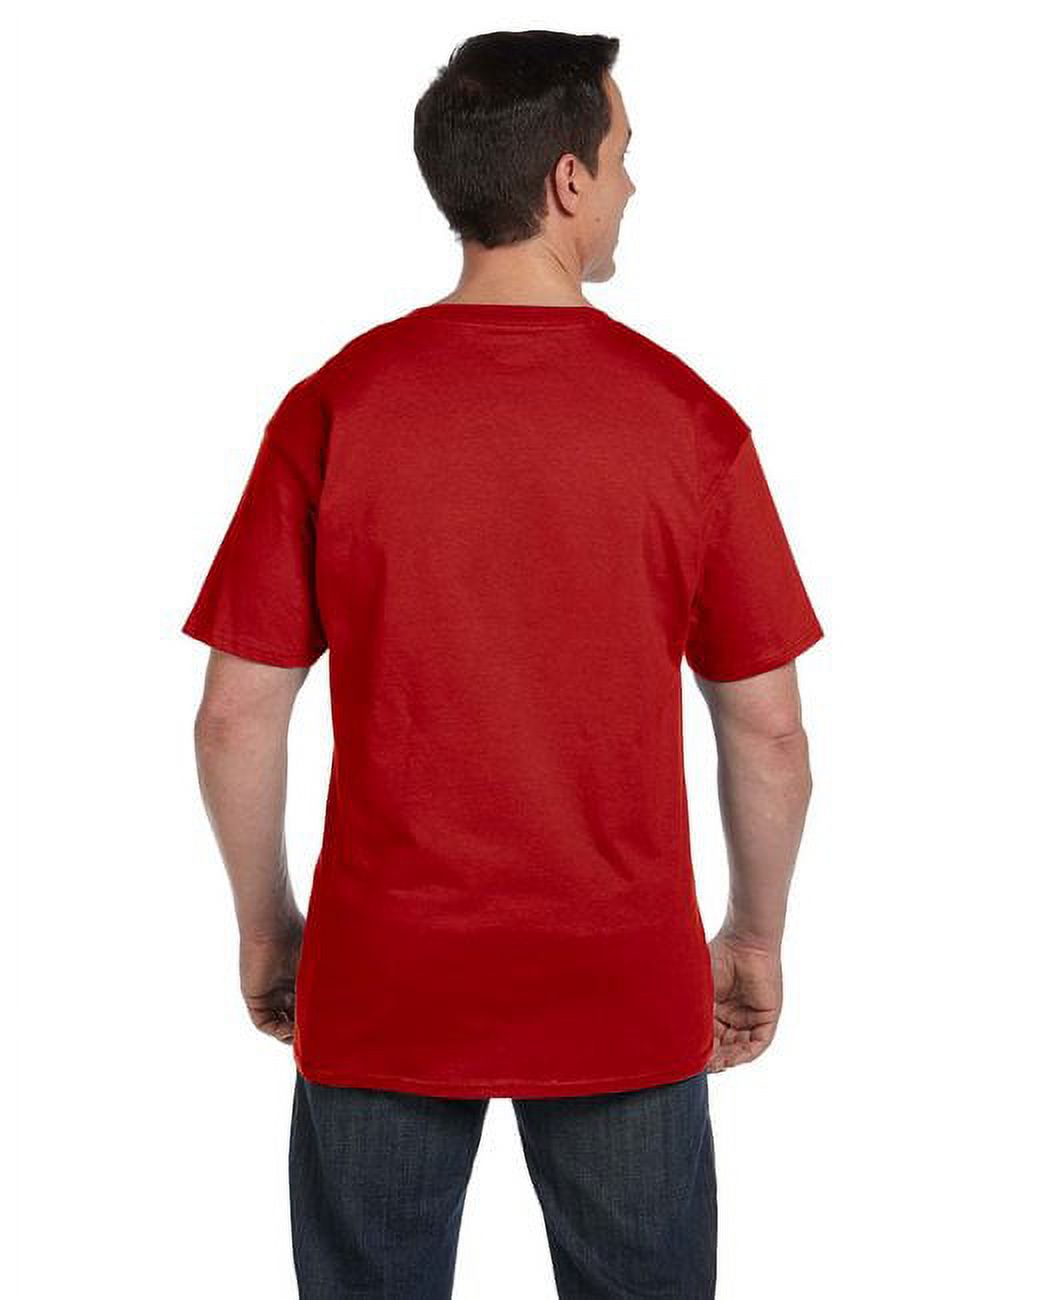 Hanes Men's Premium Beefy-T Short Sleeve T-Shirt With Pocket, Up to Size 3XL - image 2 of 6